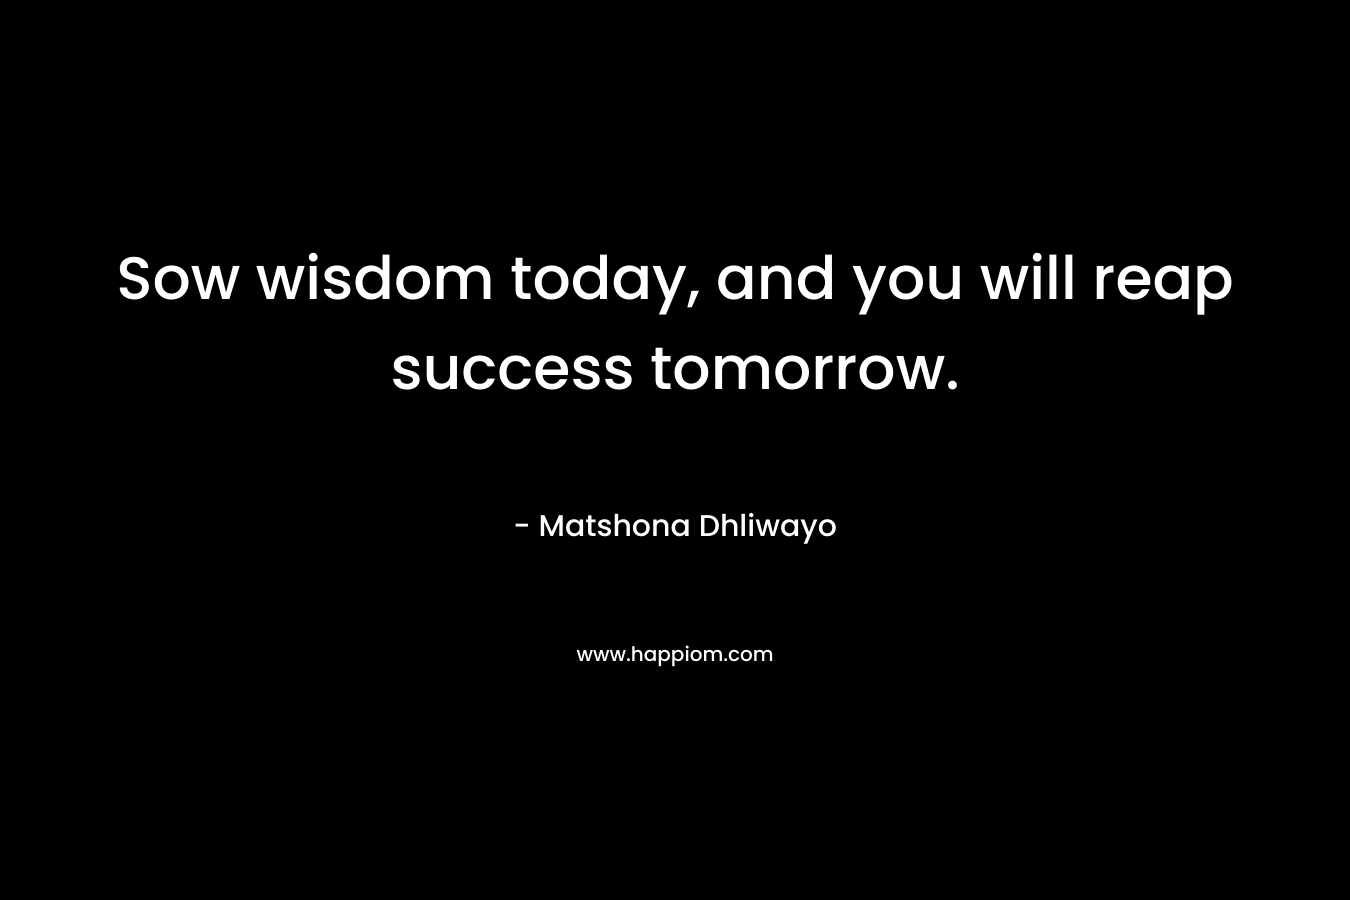 Sow wisdom today, and you will reap success tomorrow.